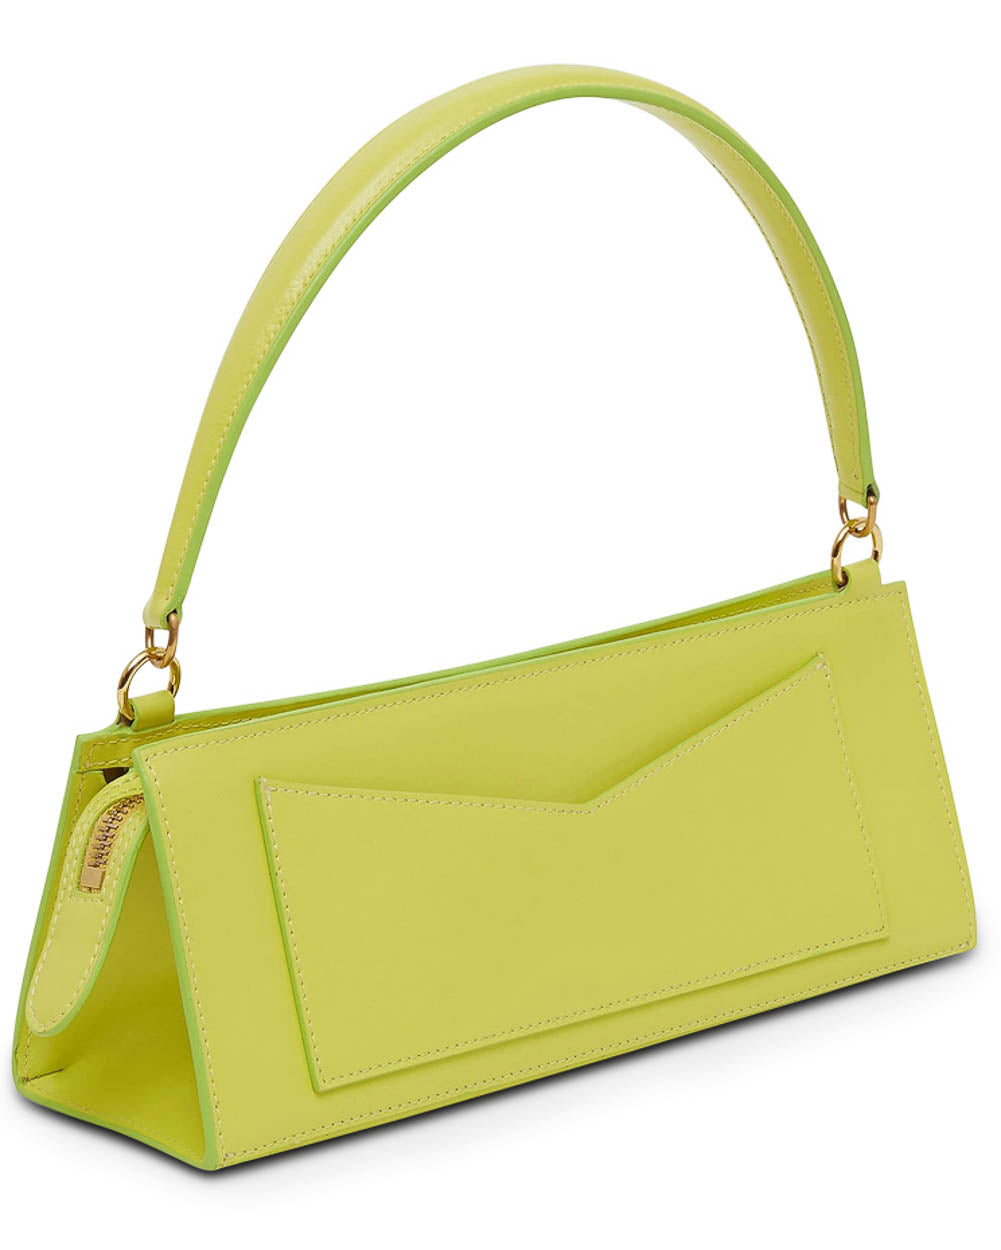 Pencil Bag in Lime